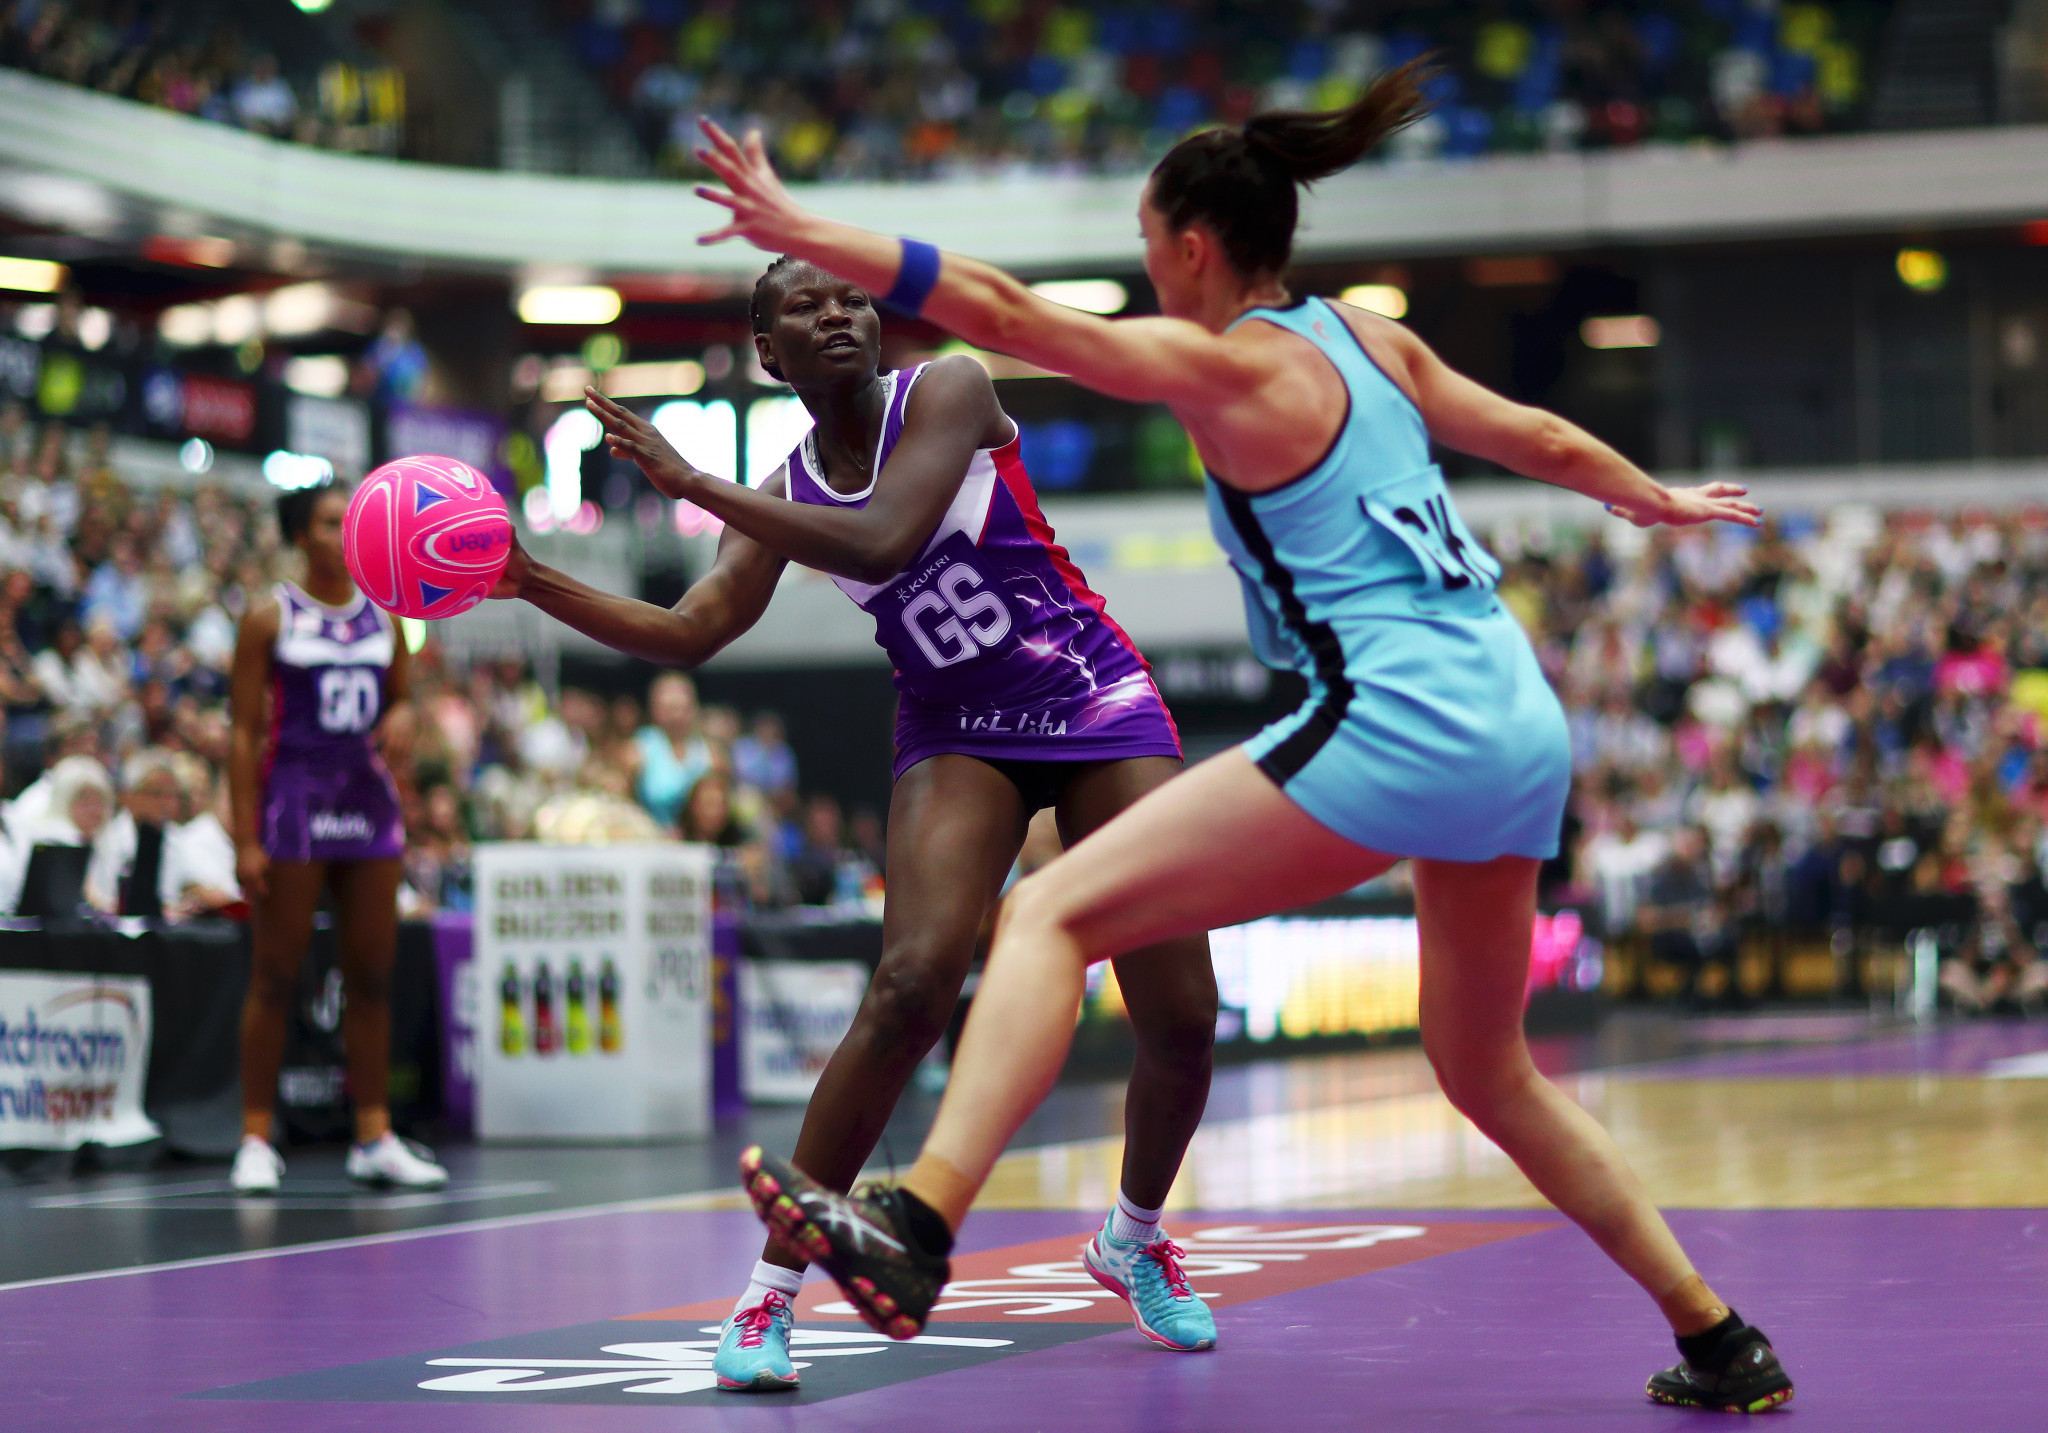 London also staged the British Fast5 Netball All-Stars Championship ©Getty Images